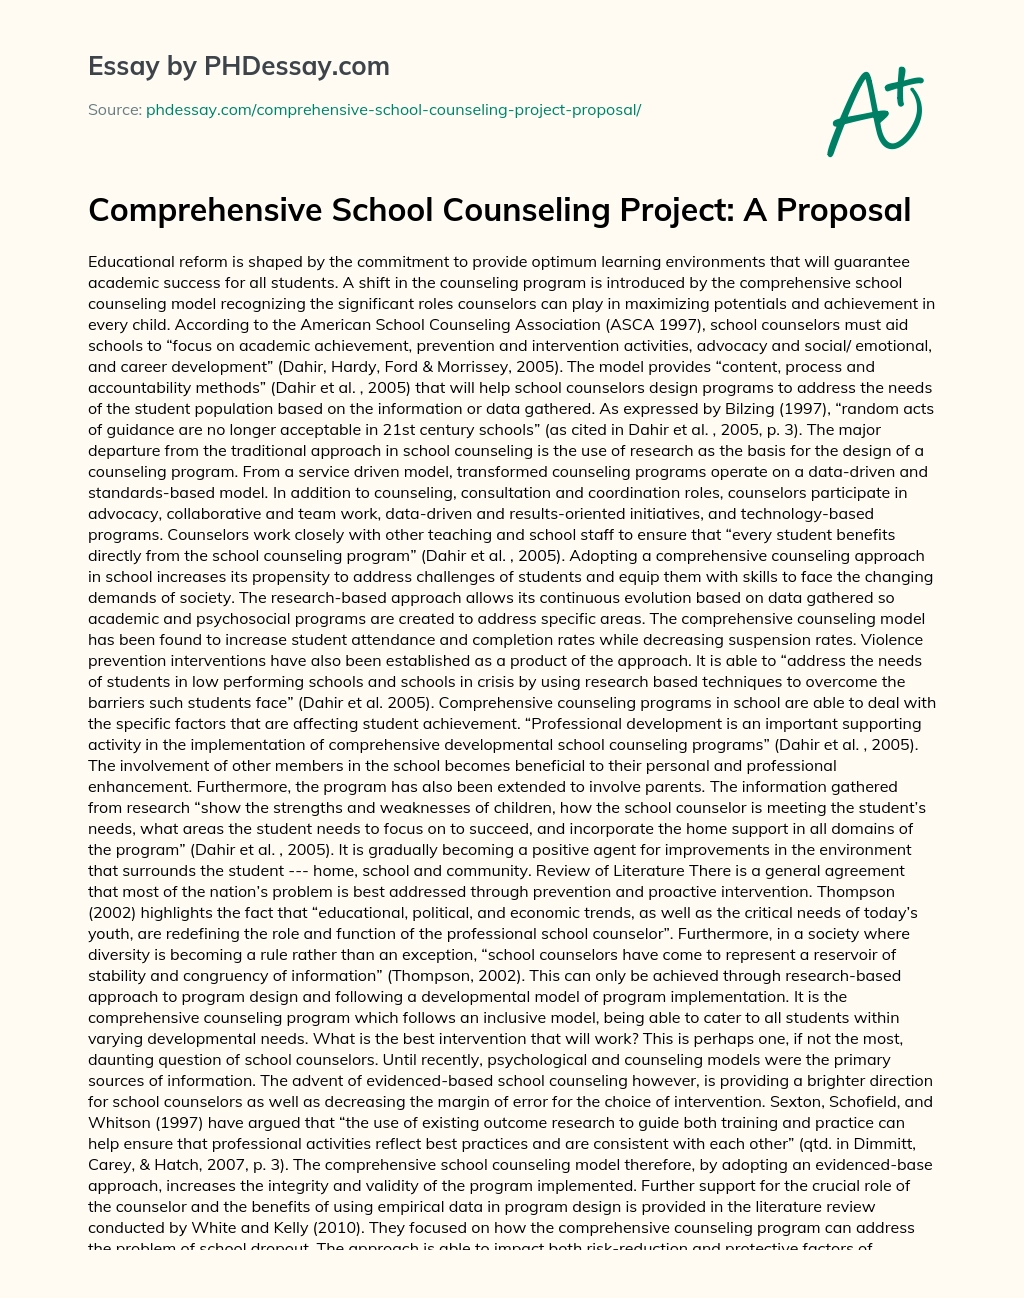 Comprehensive School Counseling Project: A Proposal essay